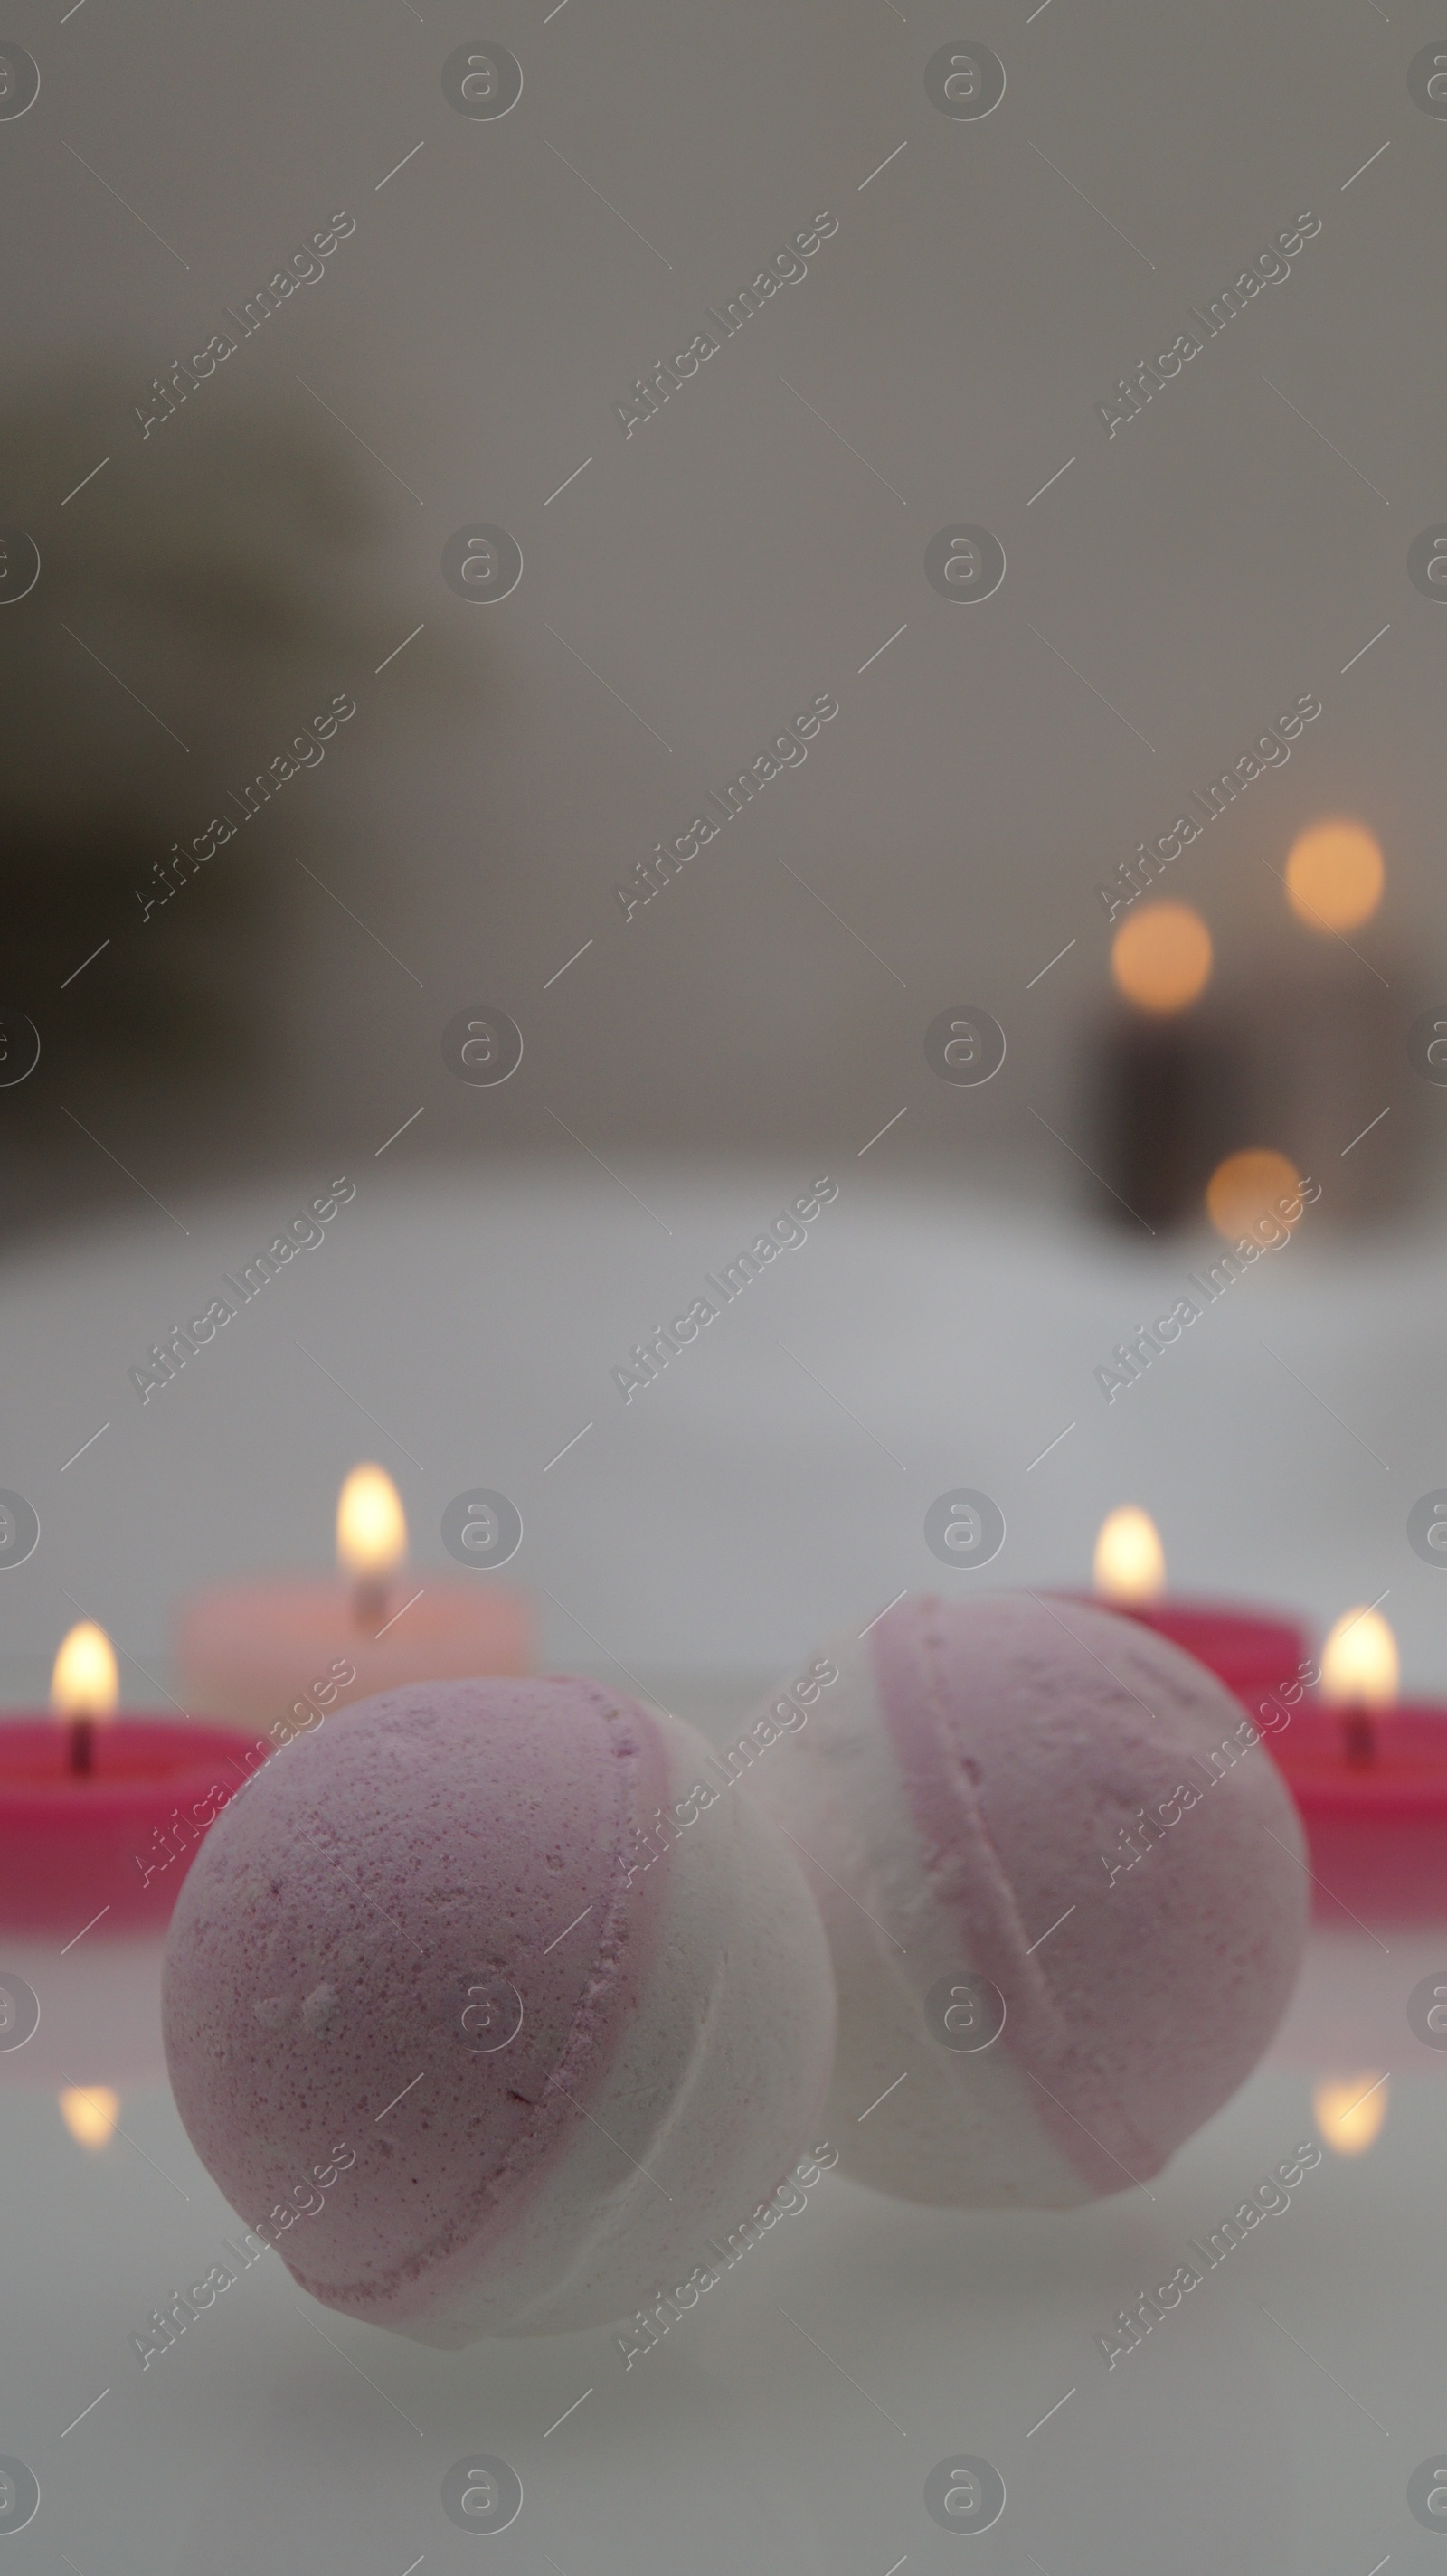 Photo of Bath bombs with burning candles on tub indoors. Bokeh effect